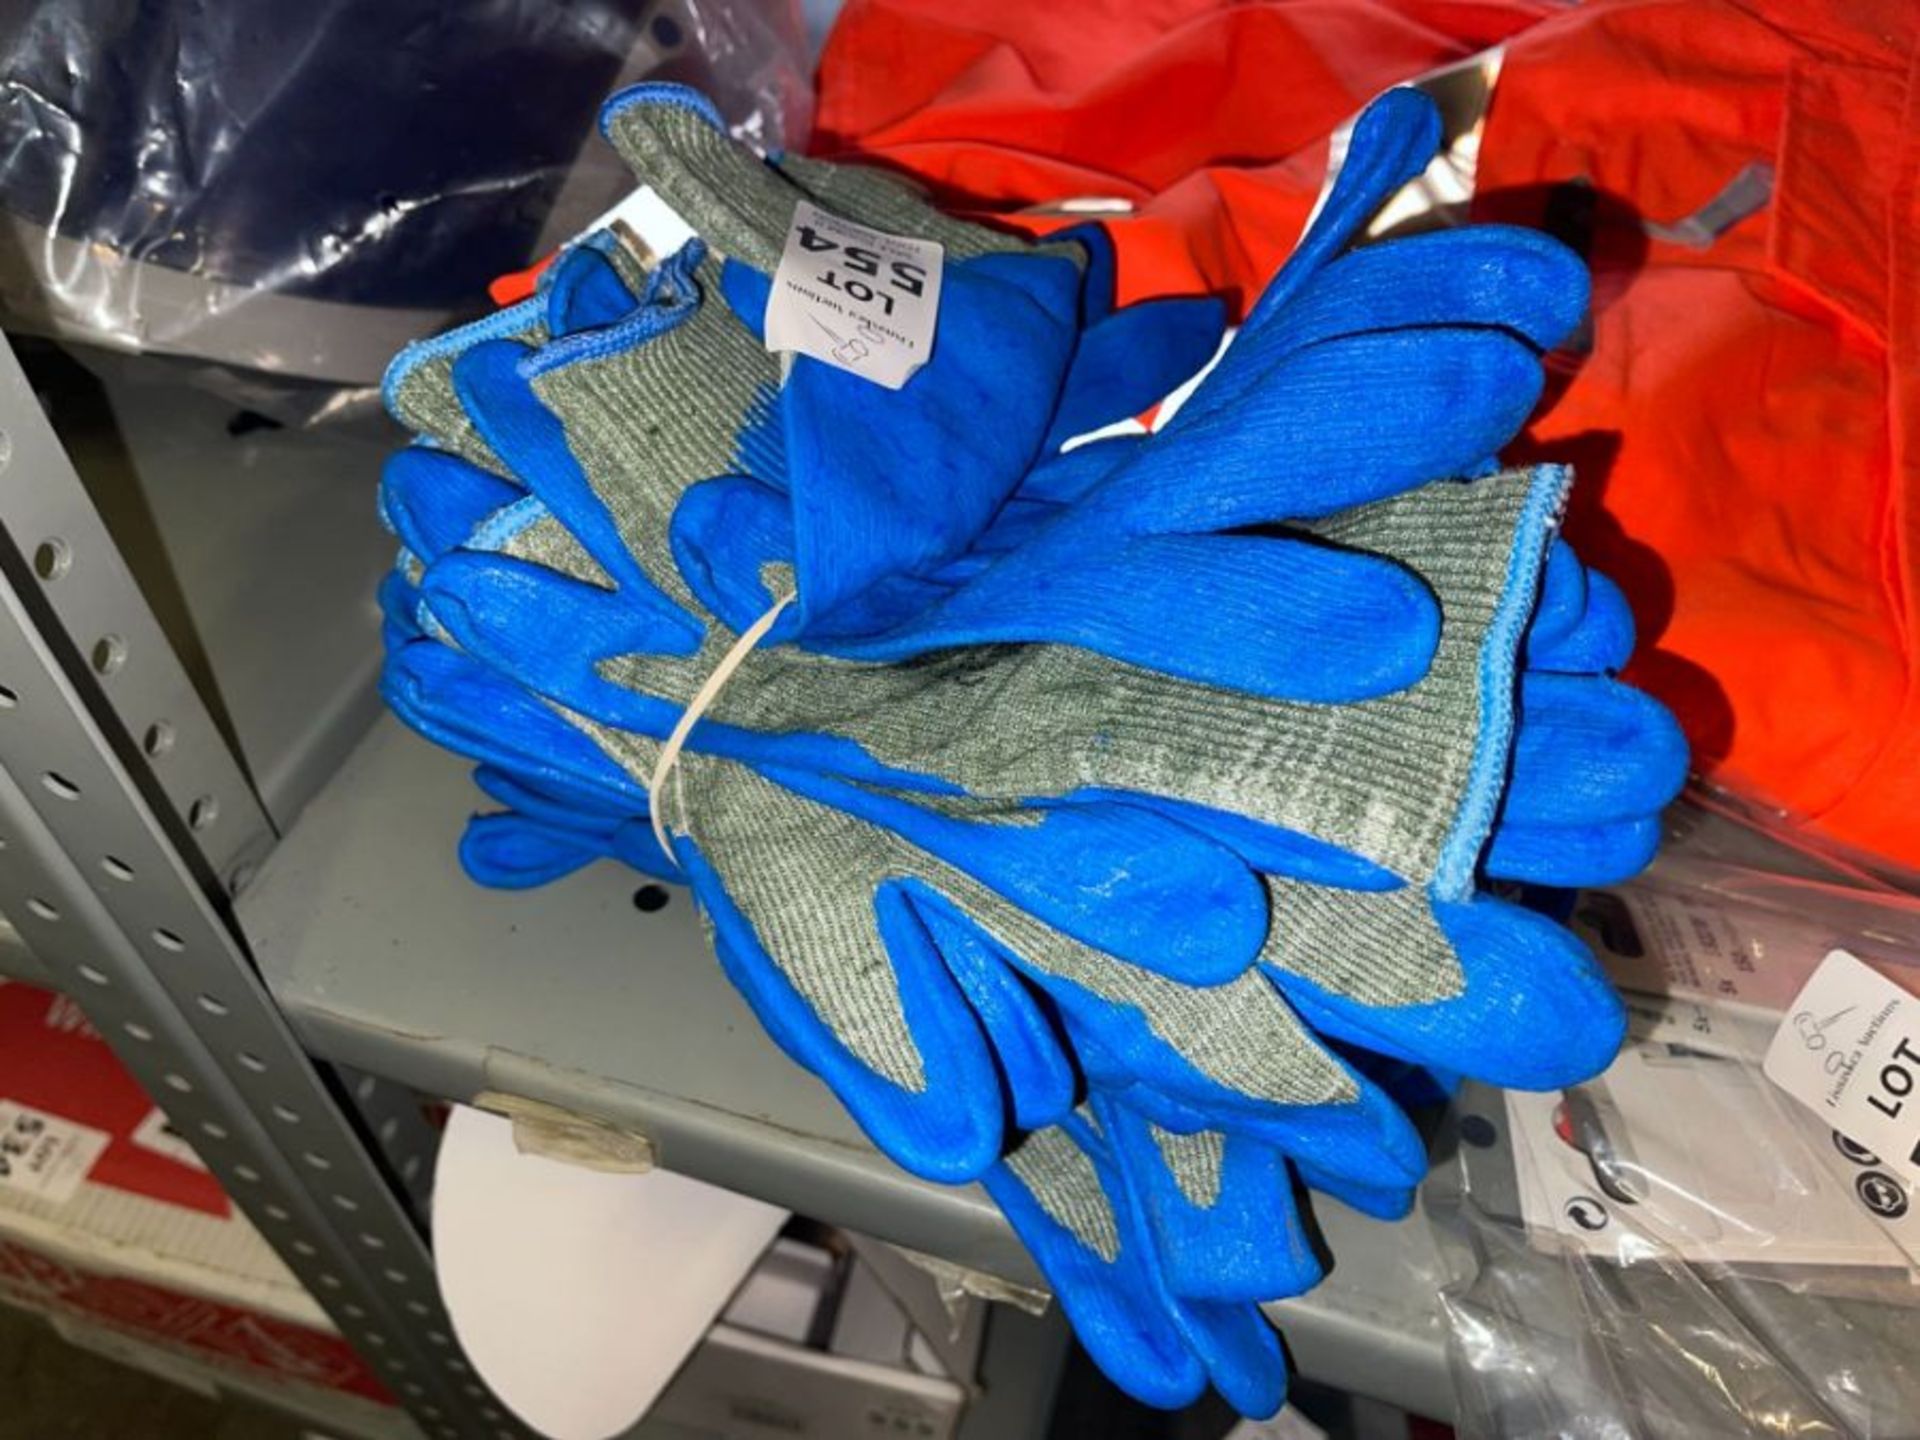 12X PAIRS OF BLUE/GREY WORK GLOVES (SIZE 7)